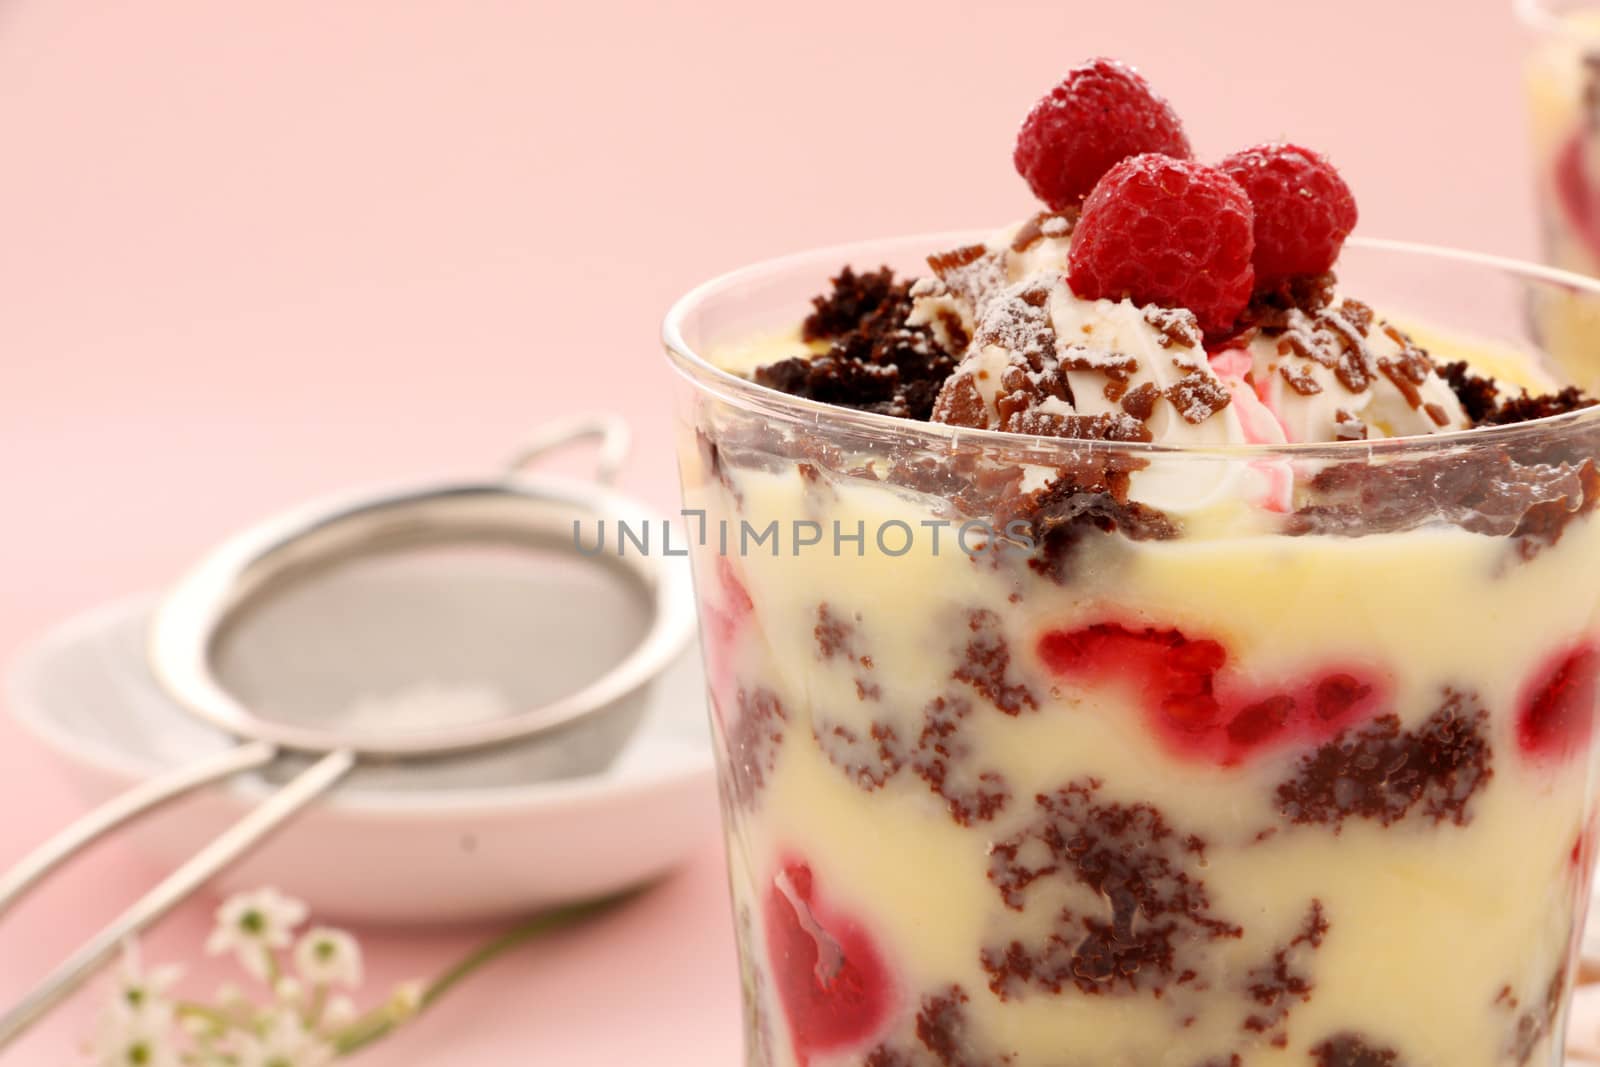 Delicious chocolate trifle dessert served in a glass topped with raspberries.